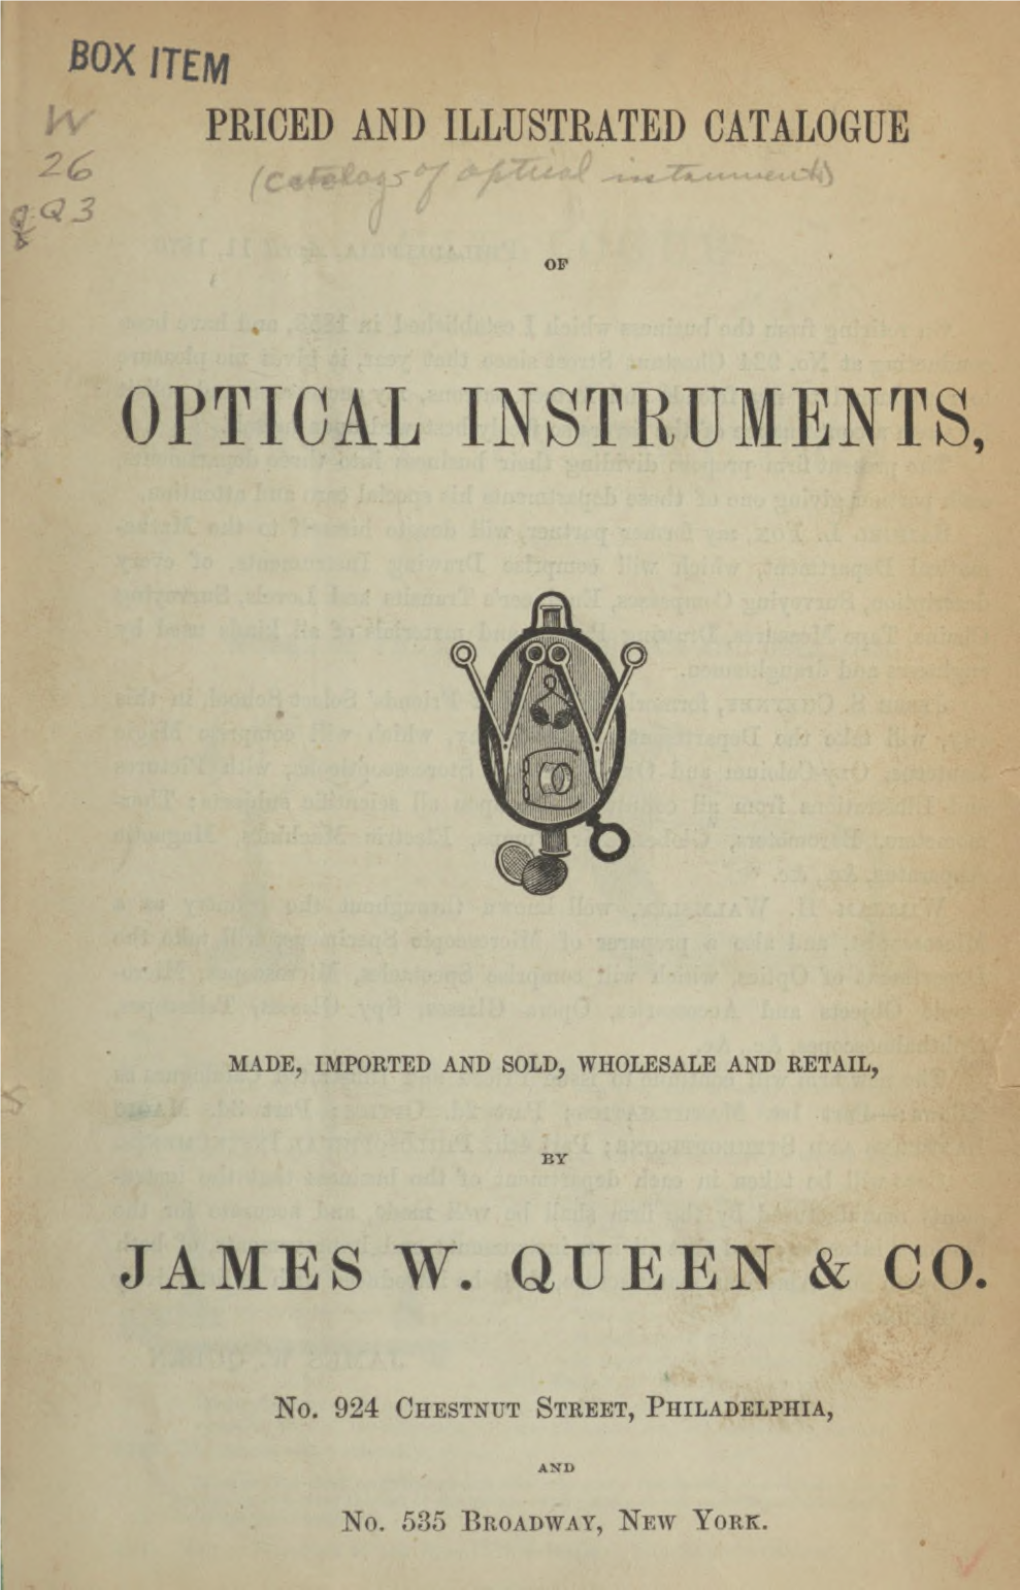 Priced and Illustrated Catalogue of Optical Instruments, Made, Imported